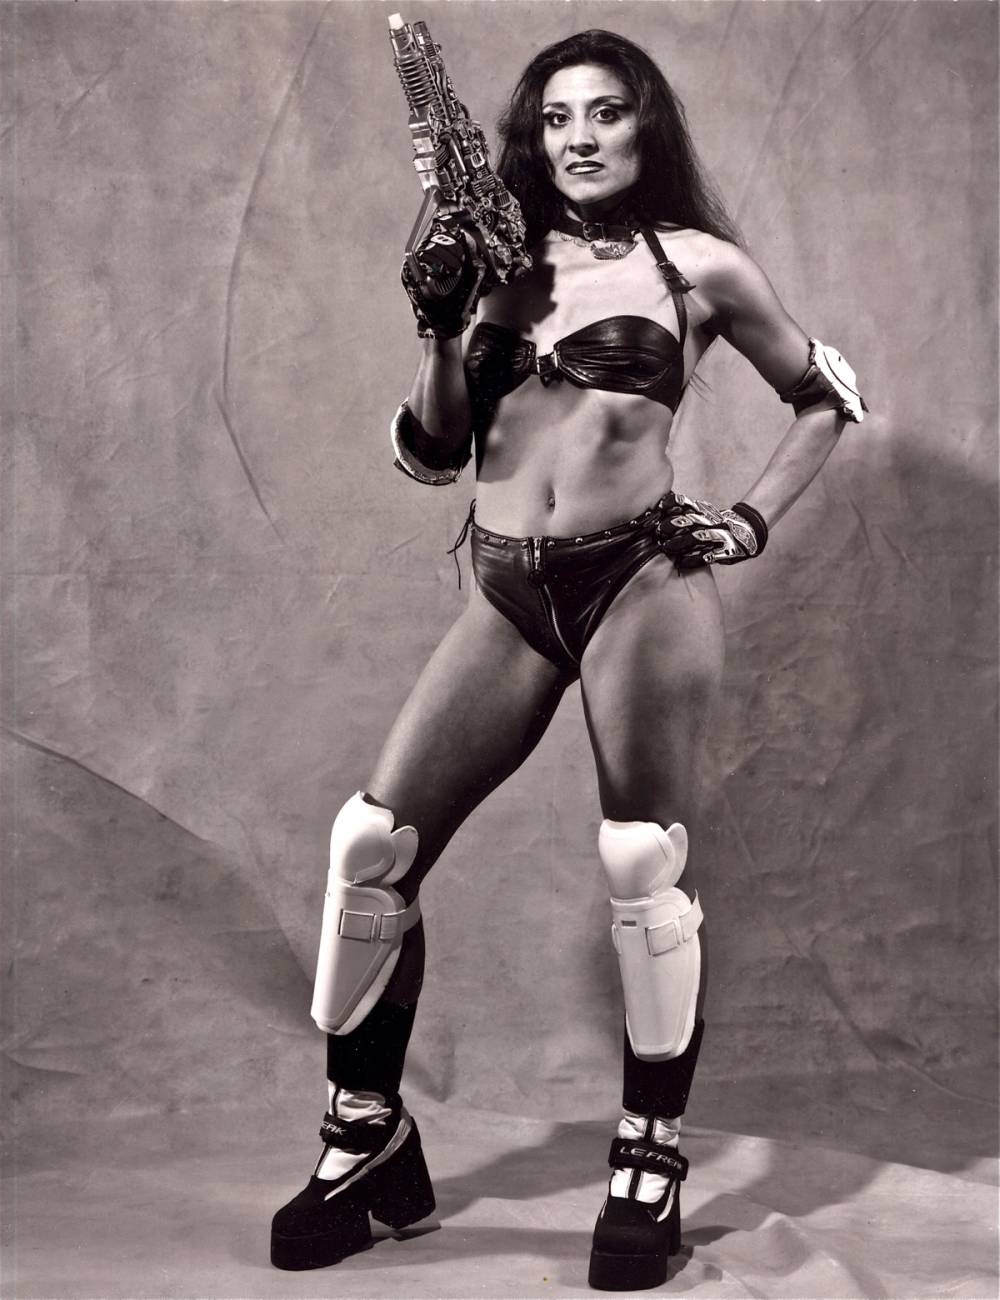 Latina woman in a bikini with a toy gun, knee and shoulder pads, high platform shoes.